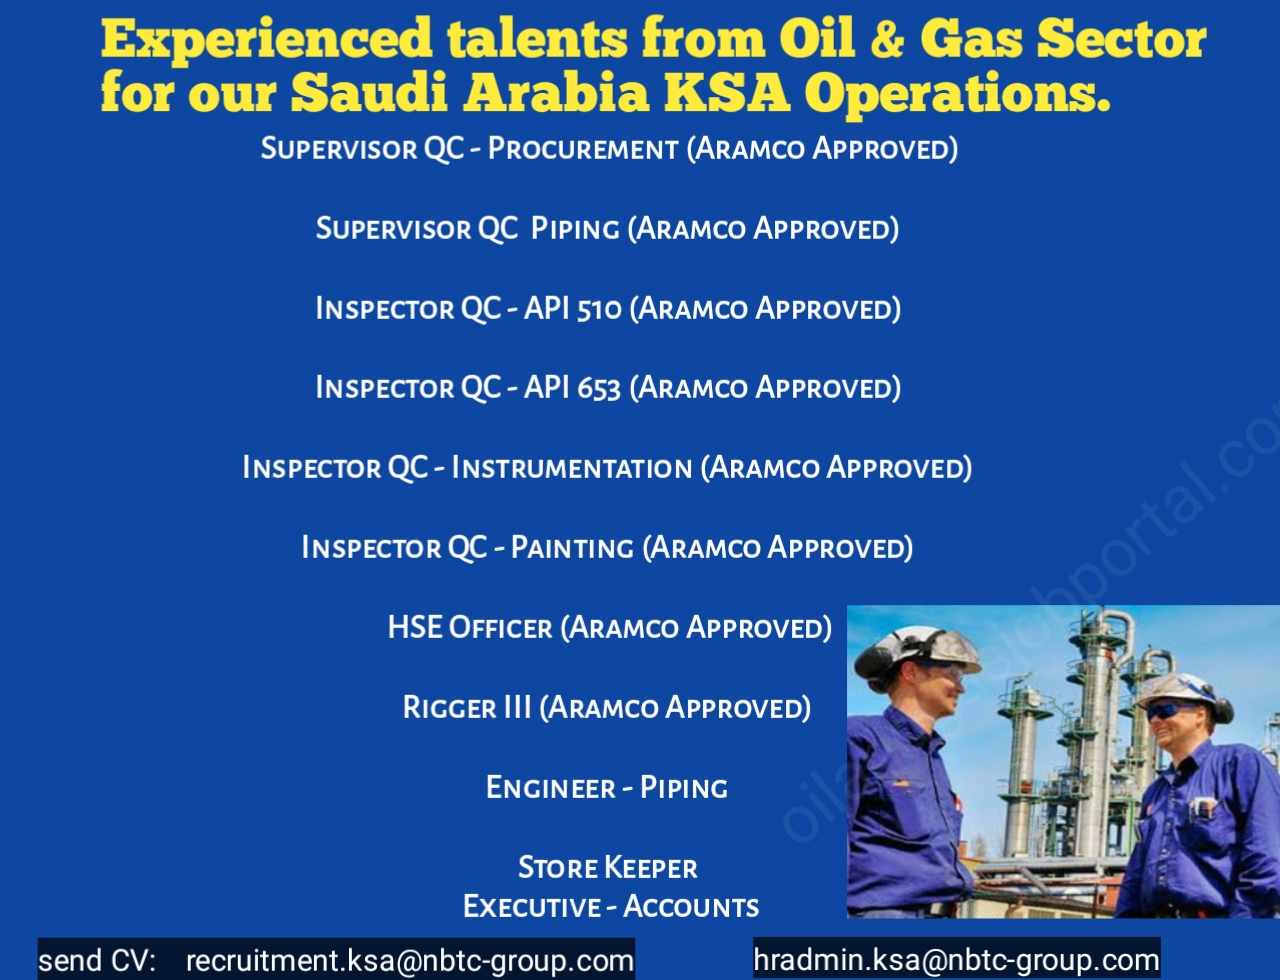 Experienced talents from Oil & Gas Sector for our Saudi Arabia KSA Operations.